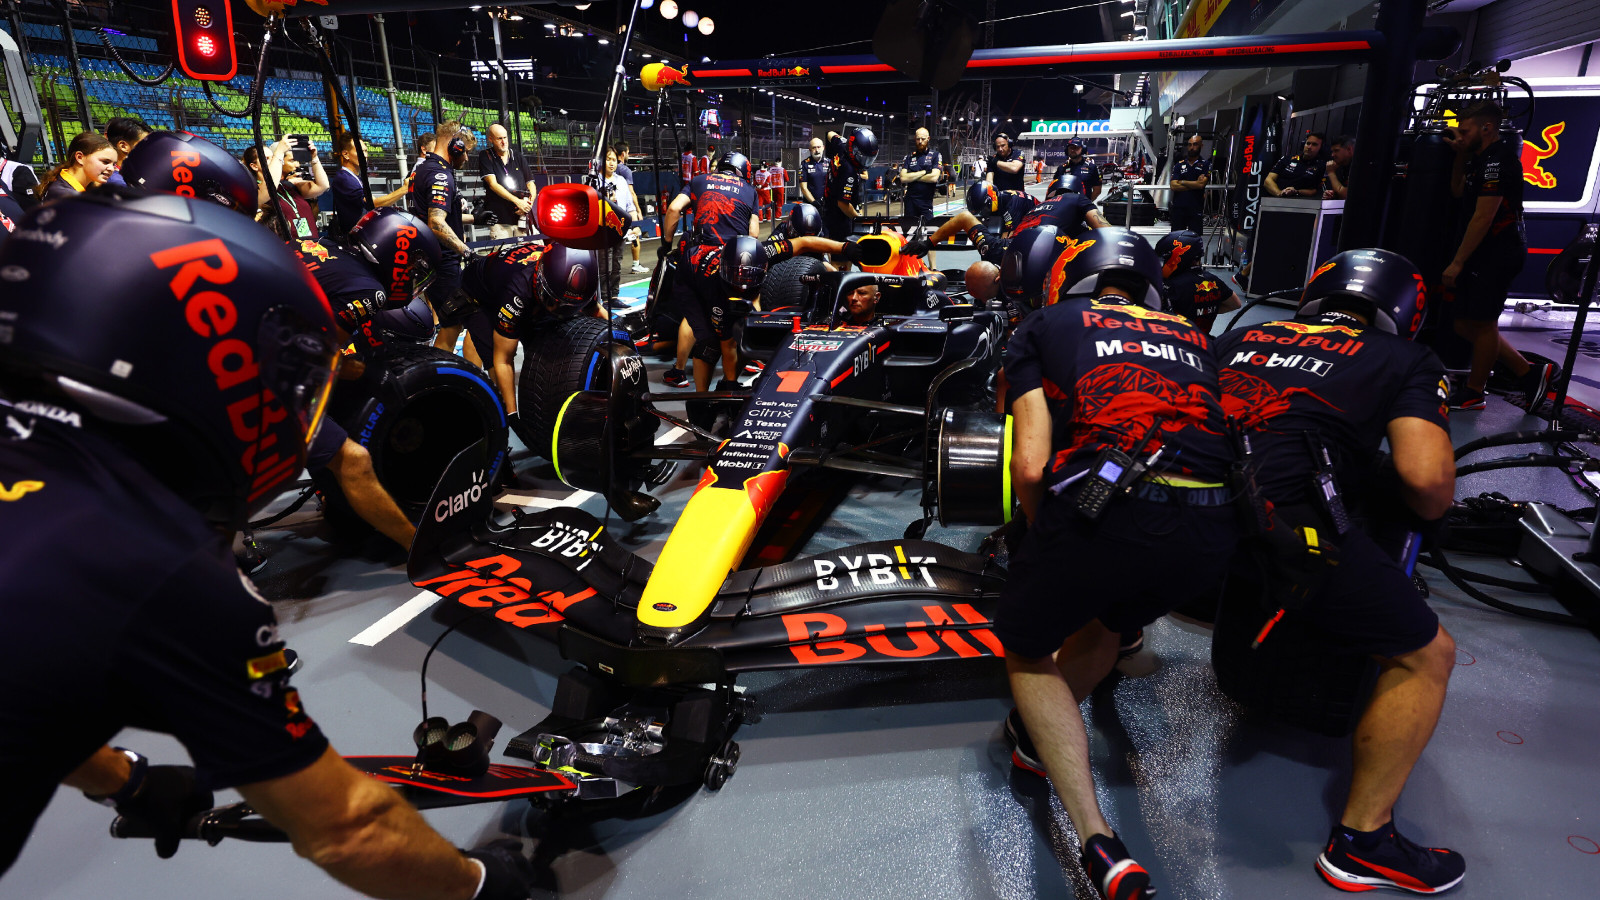 Red Bull carrying out pit stop practice in Singapore. Marina Bay, September 2022.